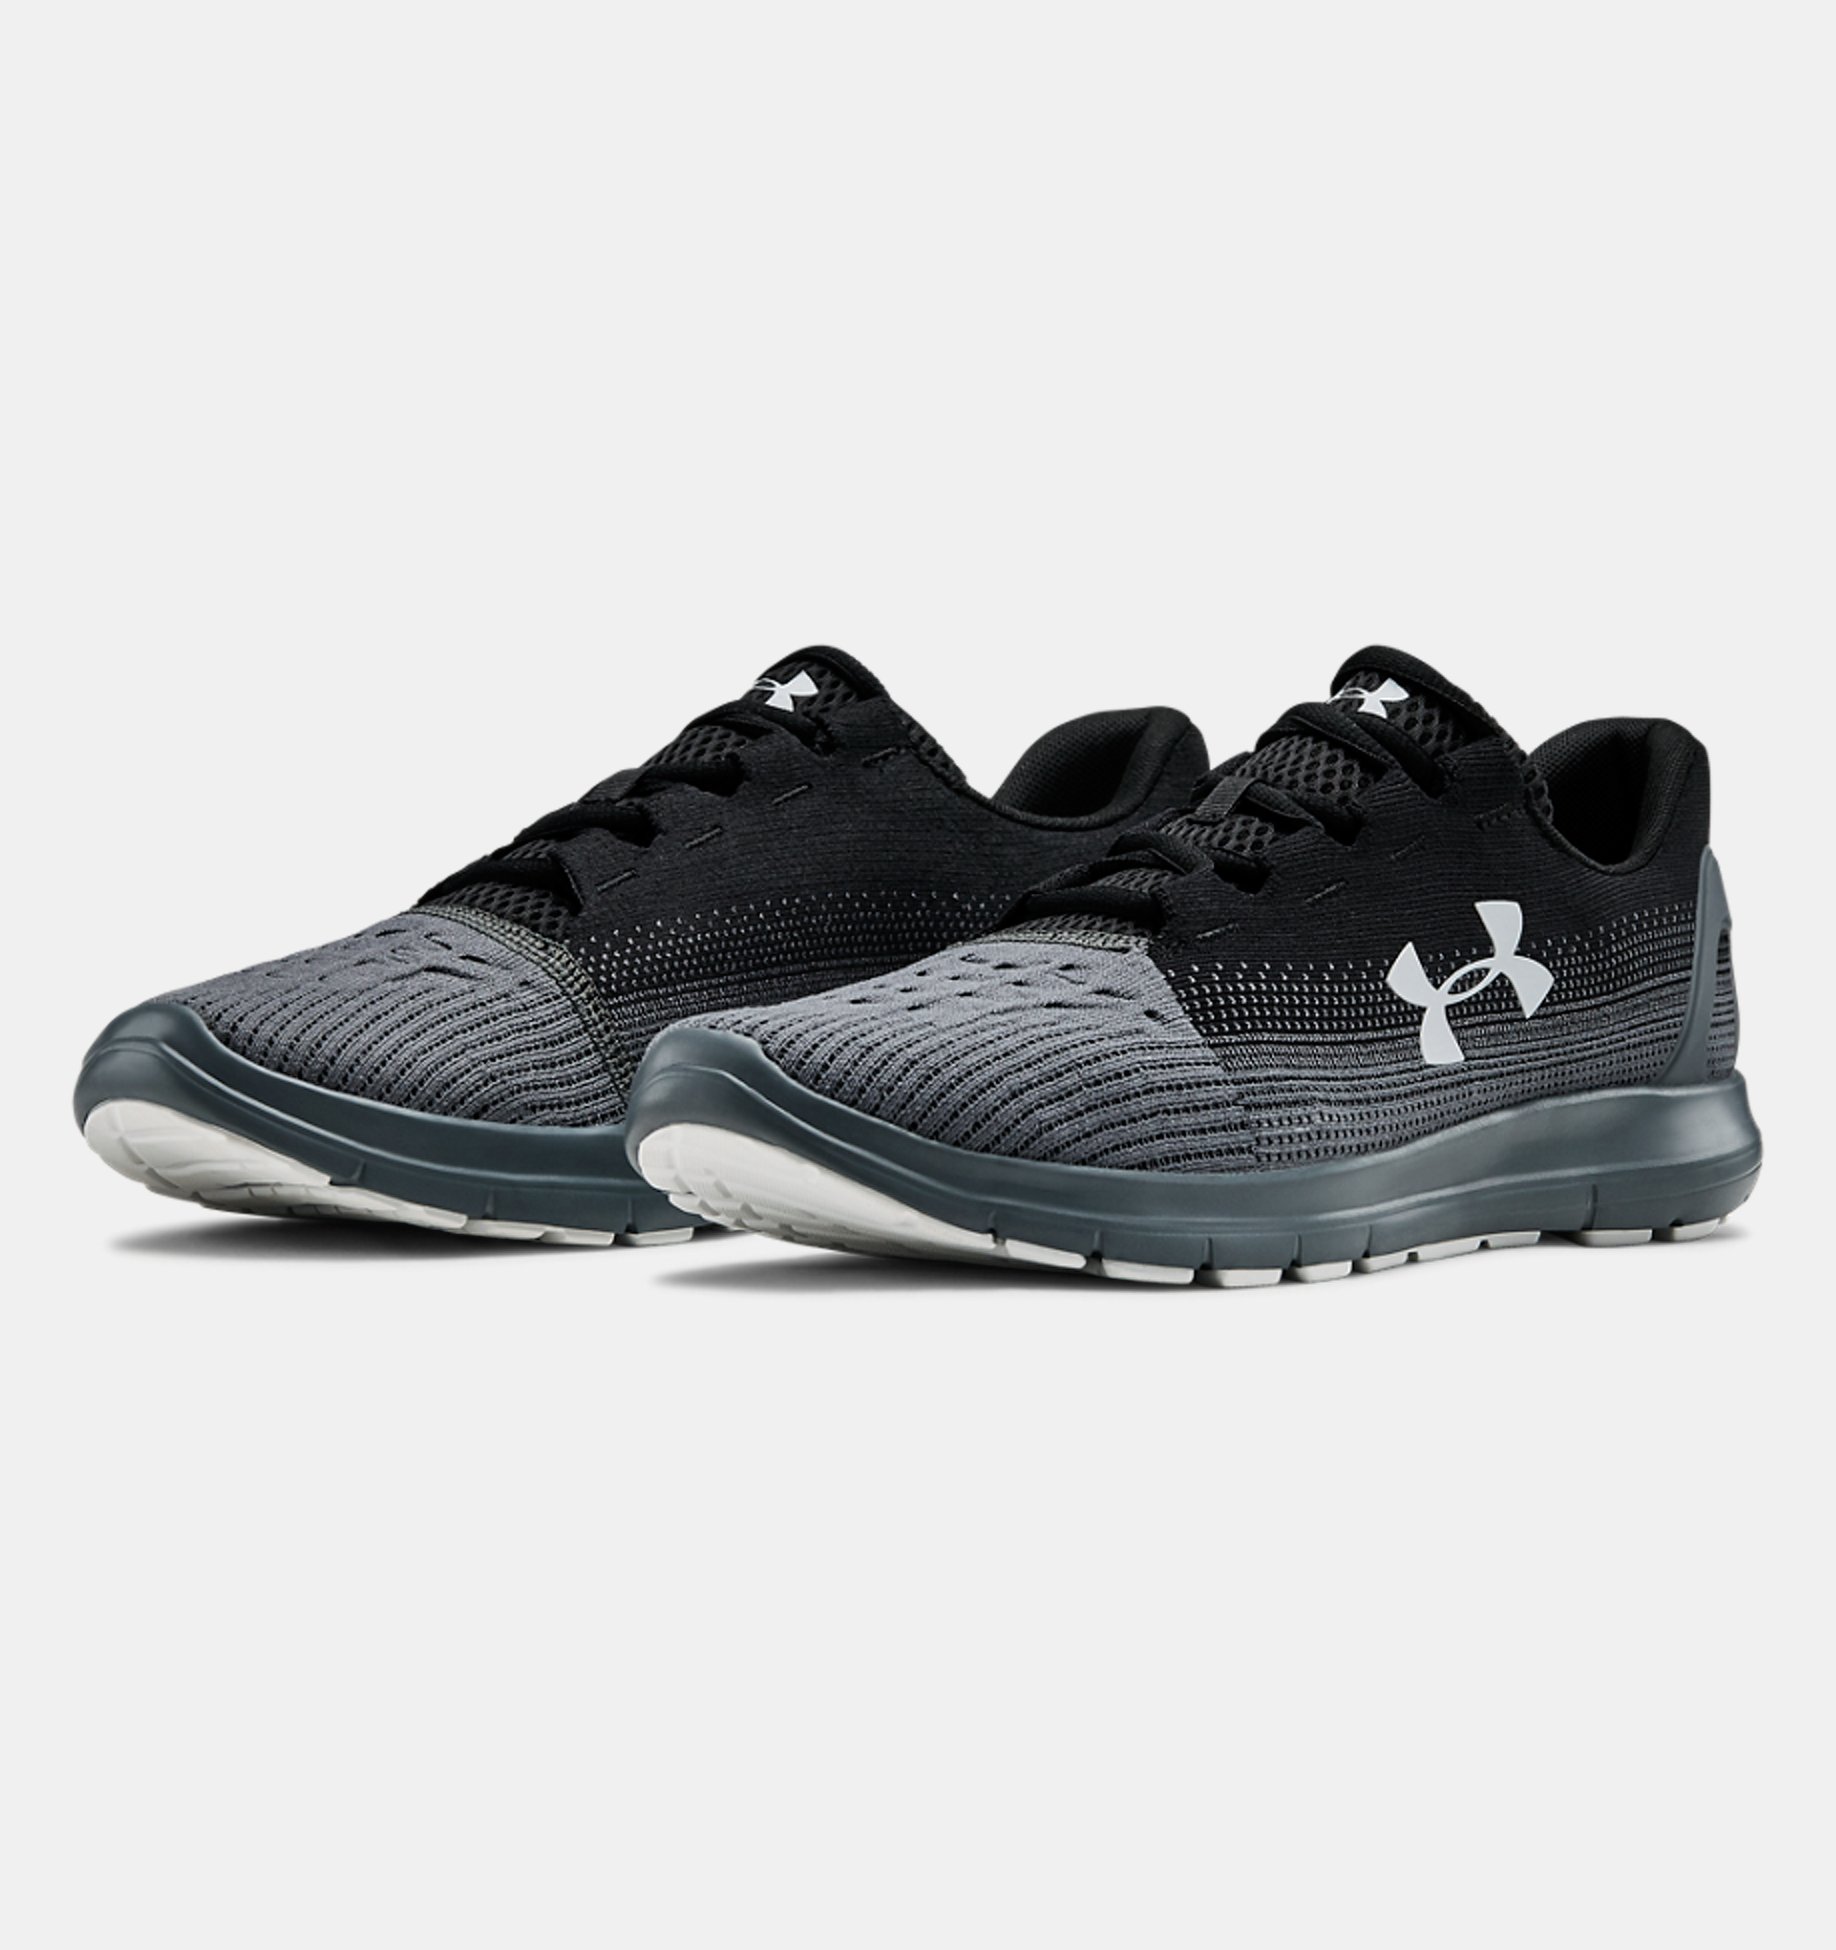 Under Armour Mens Remix Trainers Sneakers Sports Shoes Athletic Footwear 